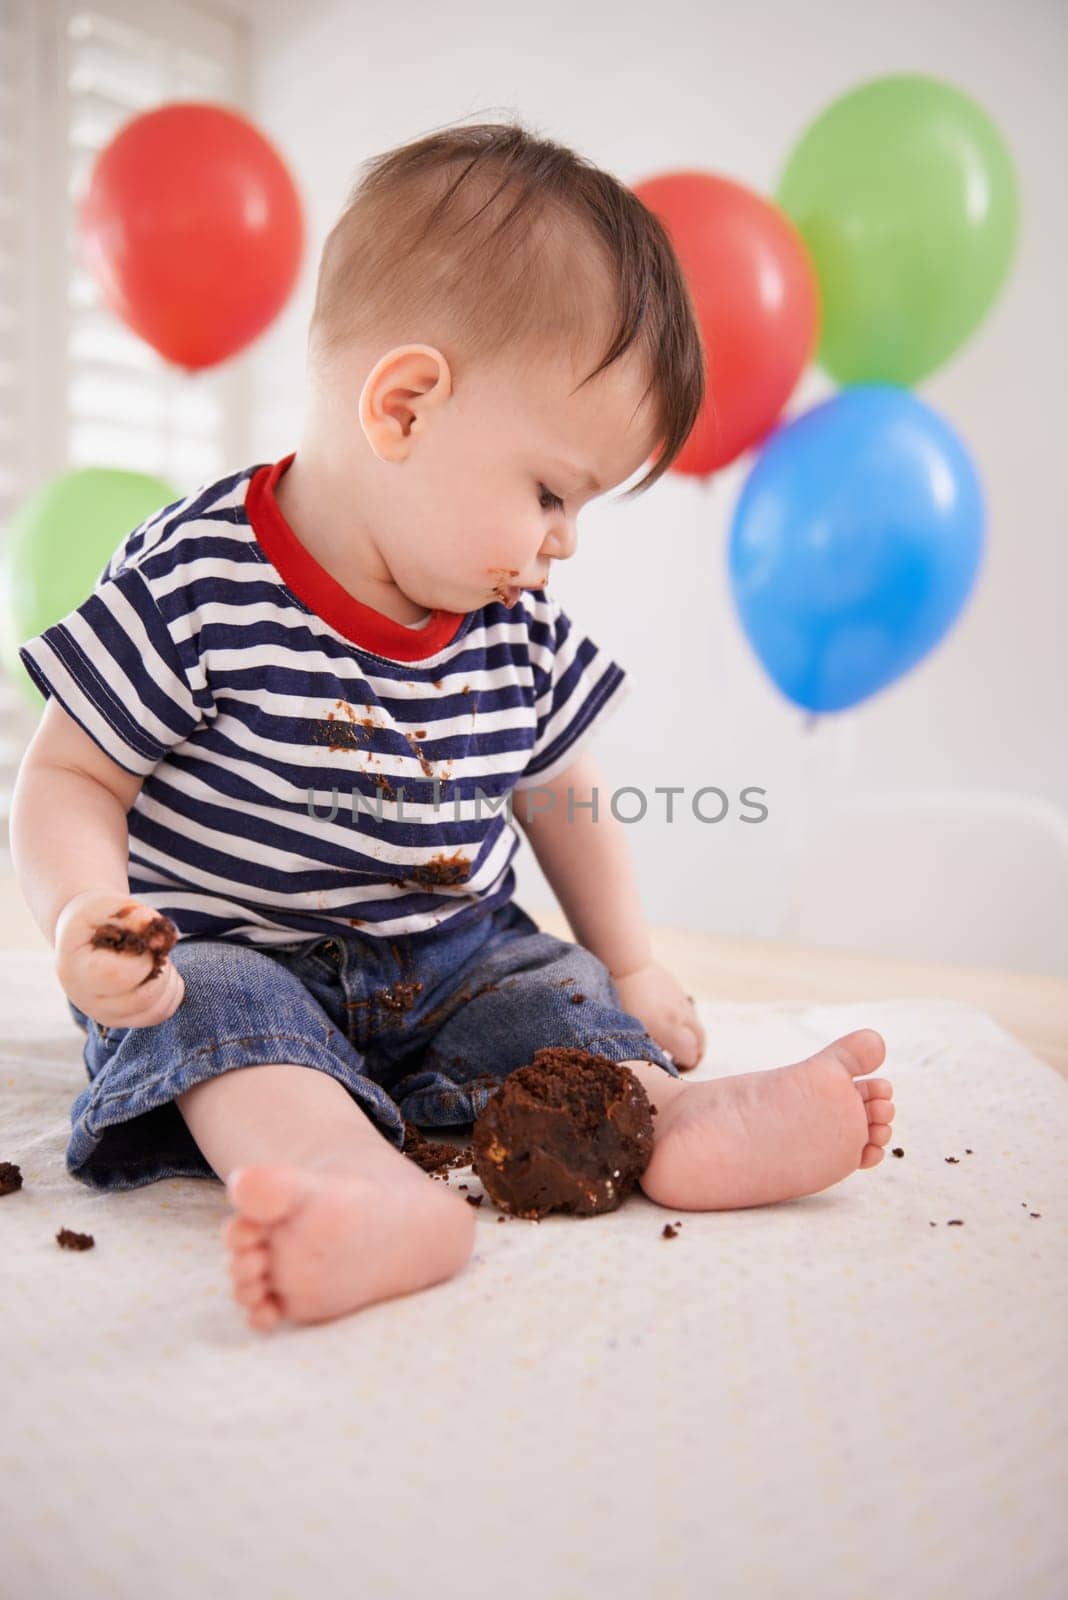 Baby, birthday party and cake or mess eating by balloons or celebrating special day with dessert candy, sweets or event. Childhood, playing and dirty in home with snack or weekend, surprise or hungry by YuriArcurs